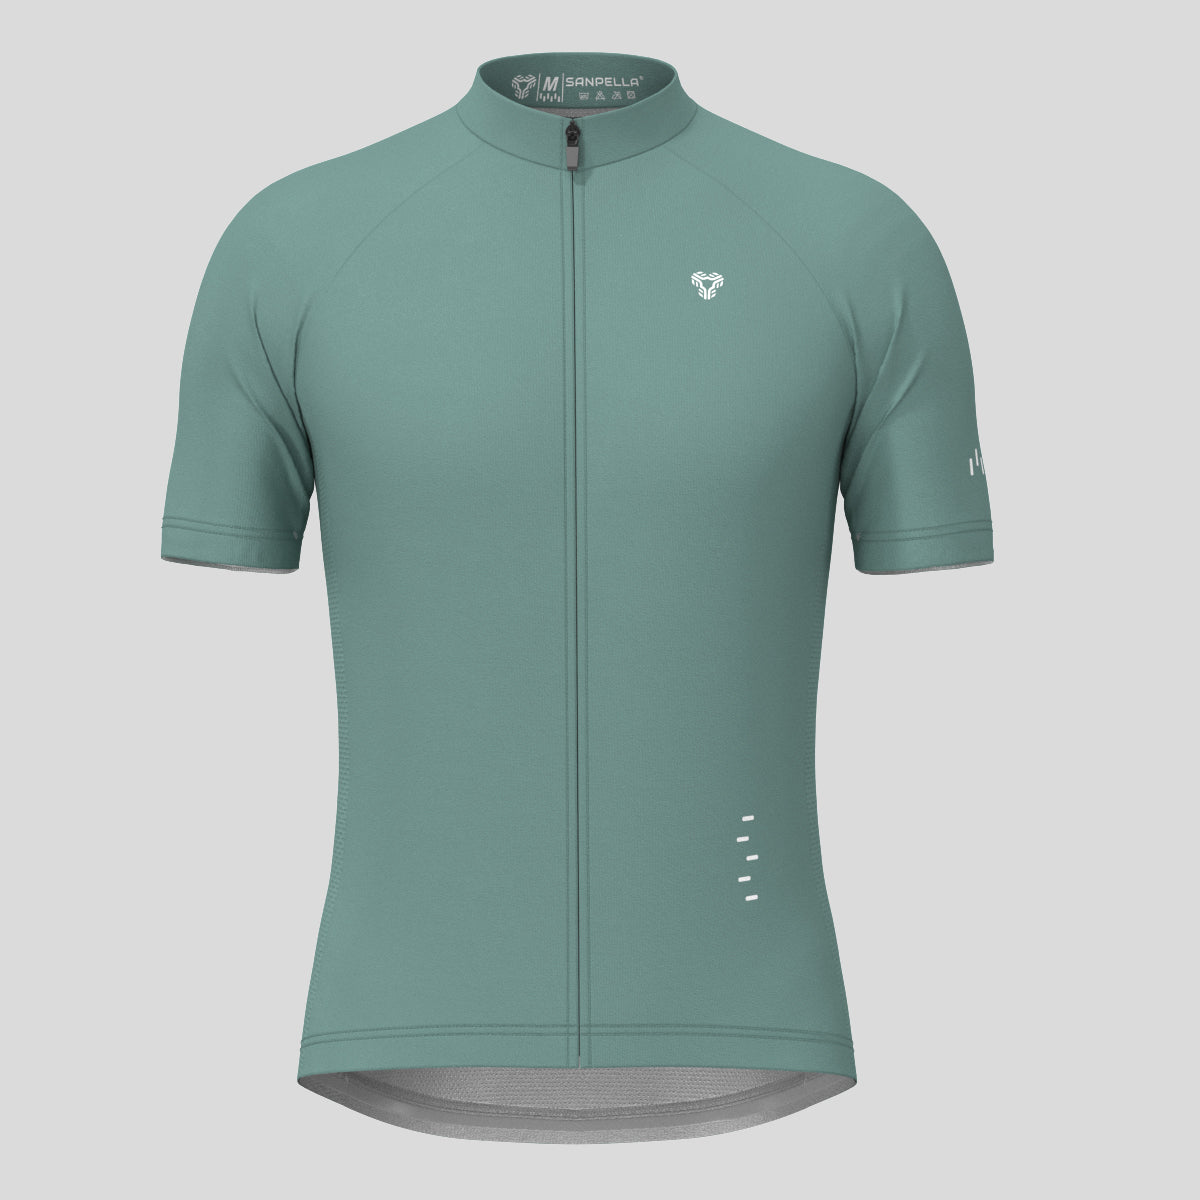 Men's Minimal Solid Cycling Jersey - Sage